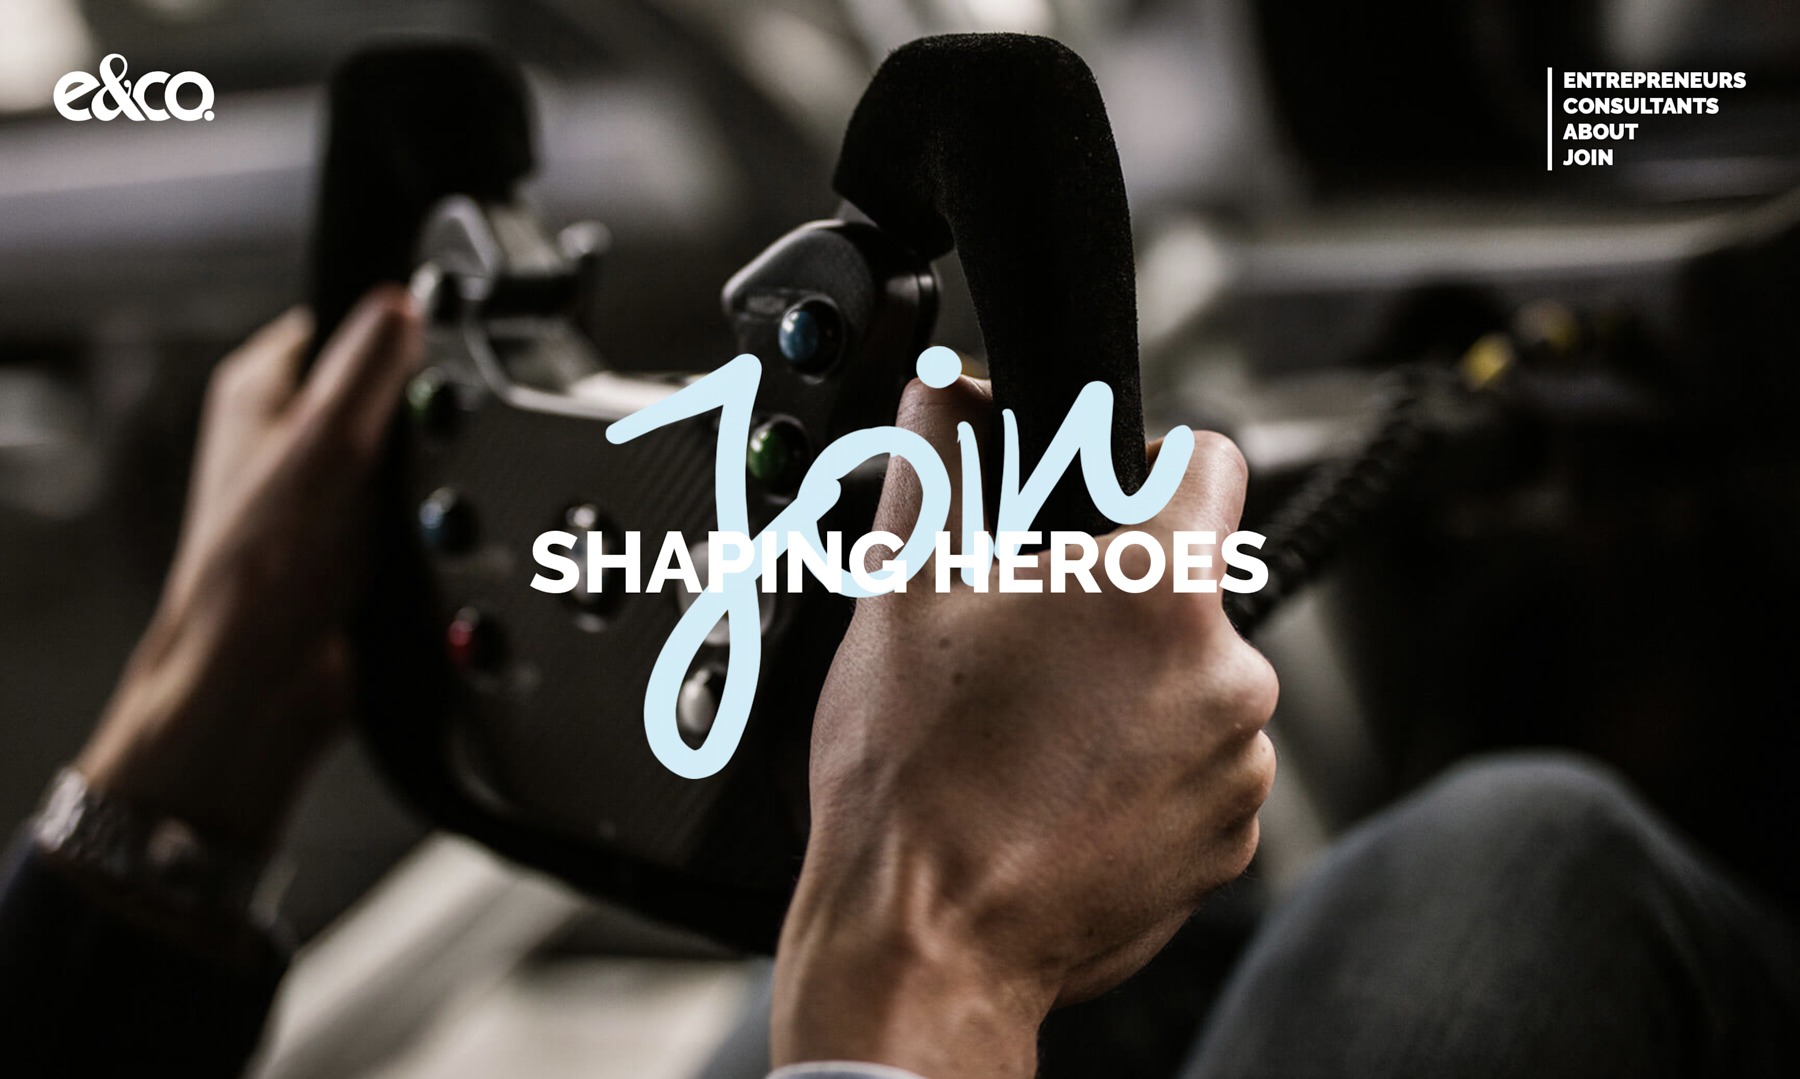 eandco campaign shaping heroes (21 images) by Mike Meyer Photography